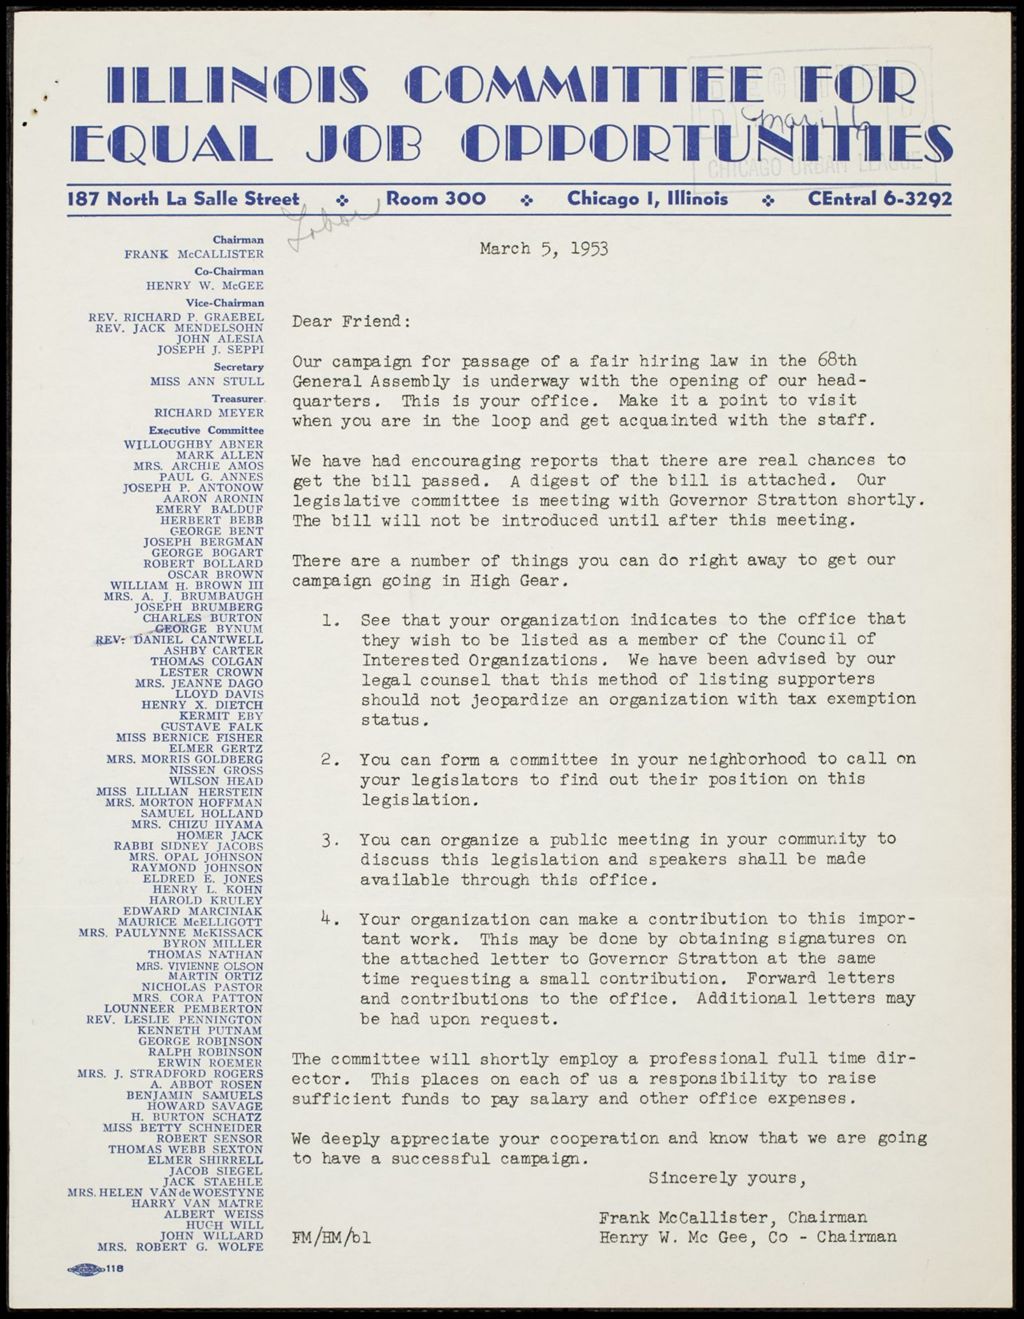 Miniature of Illinois Committee for Equal Job Opportunity, 1953 (Folder I-2714)